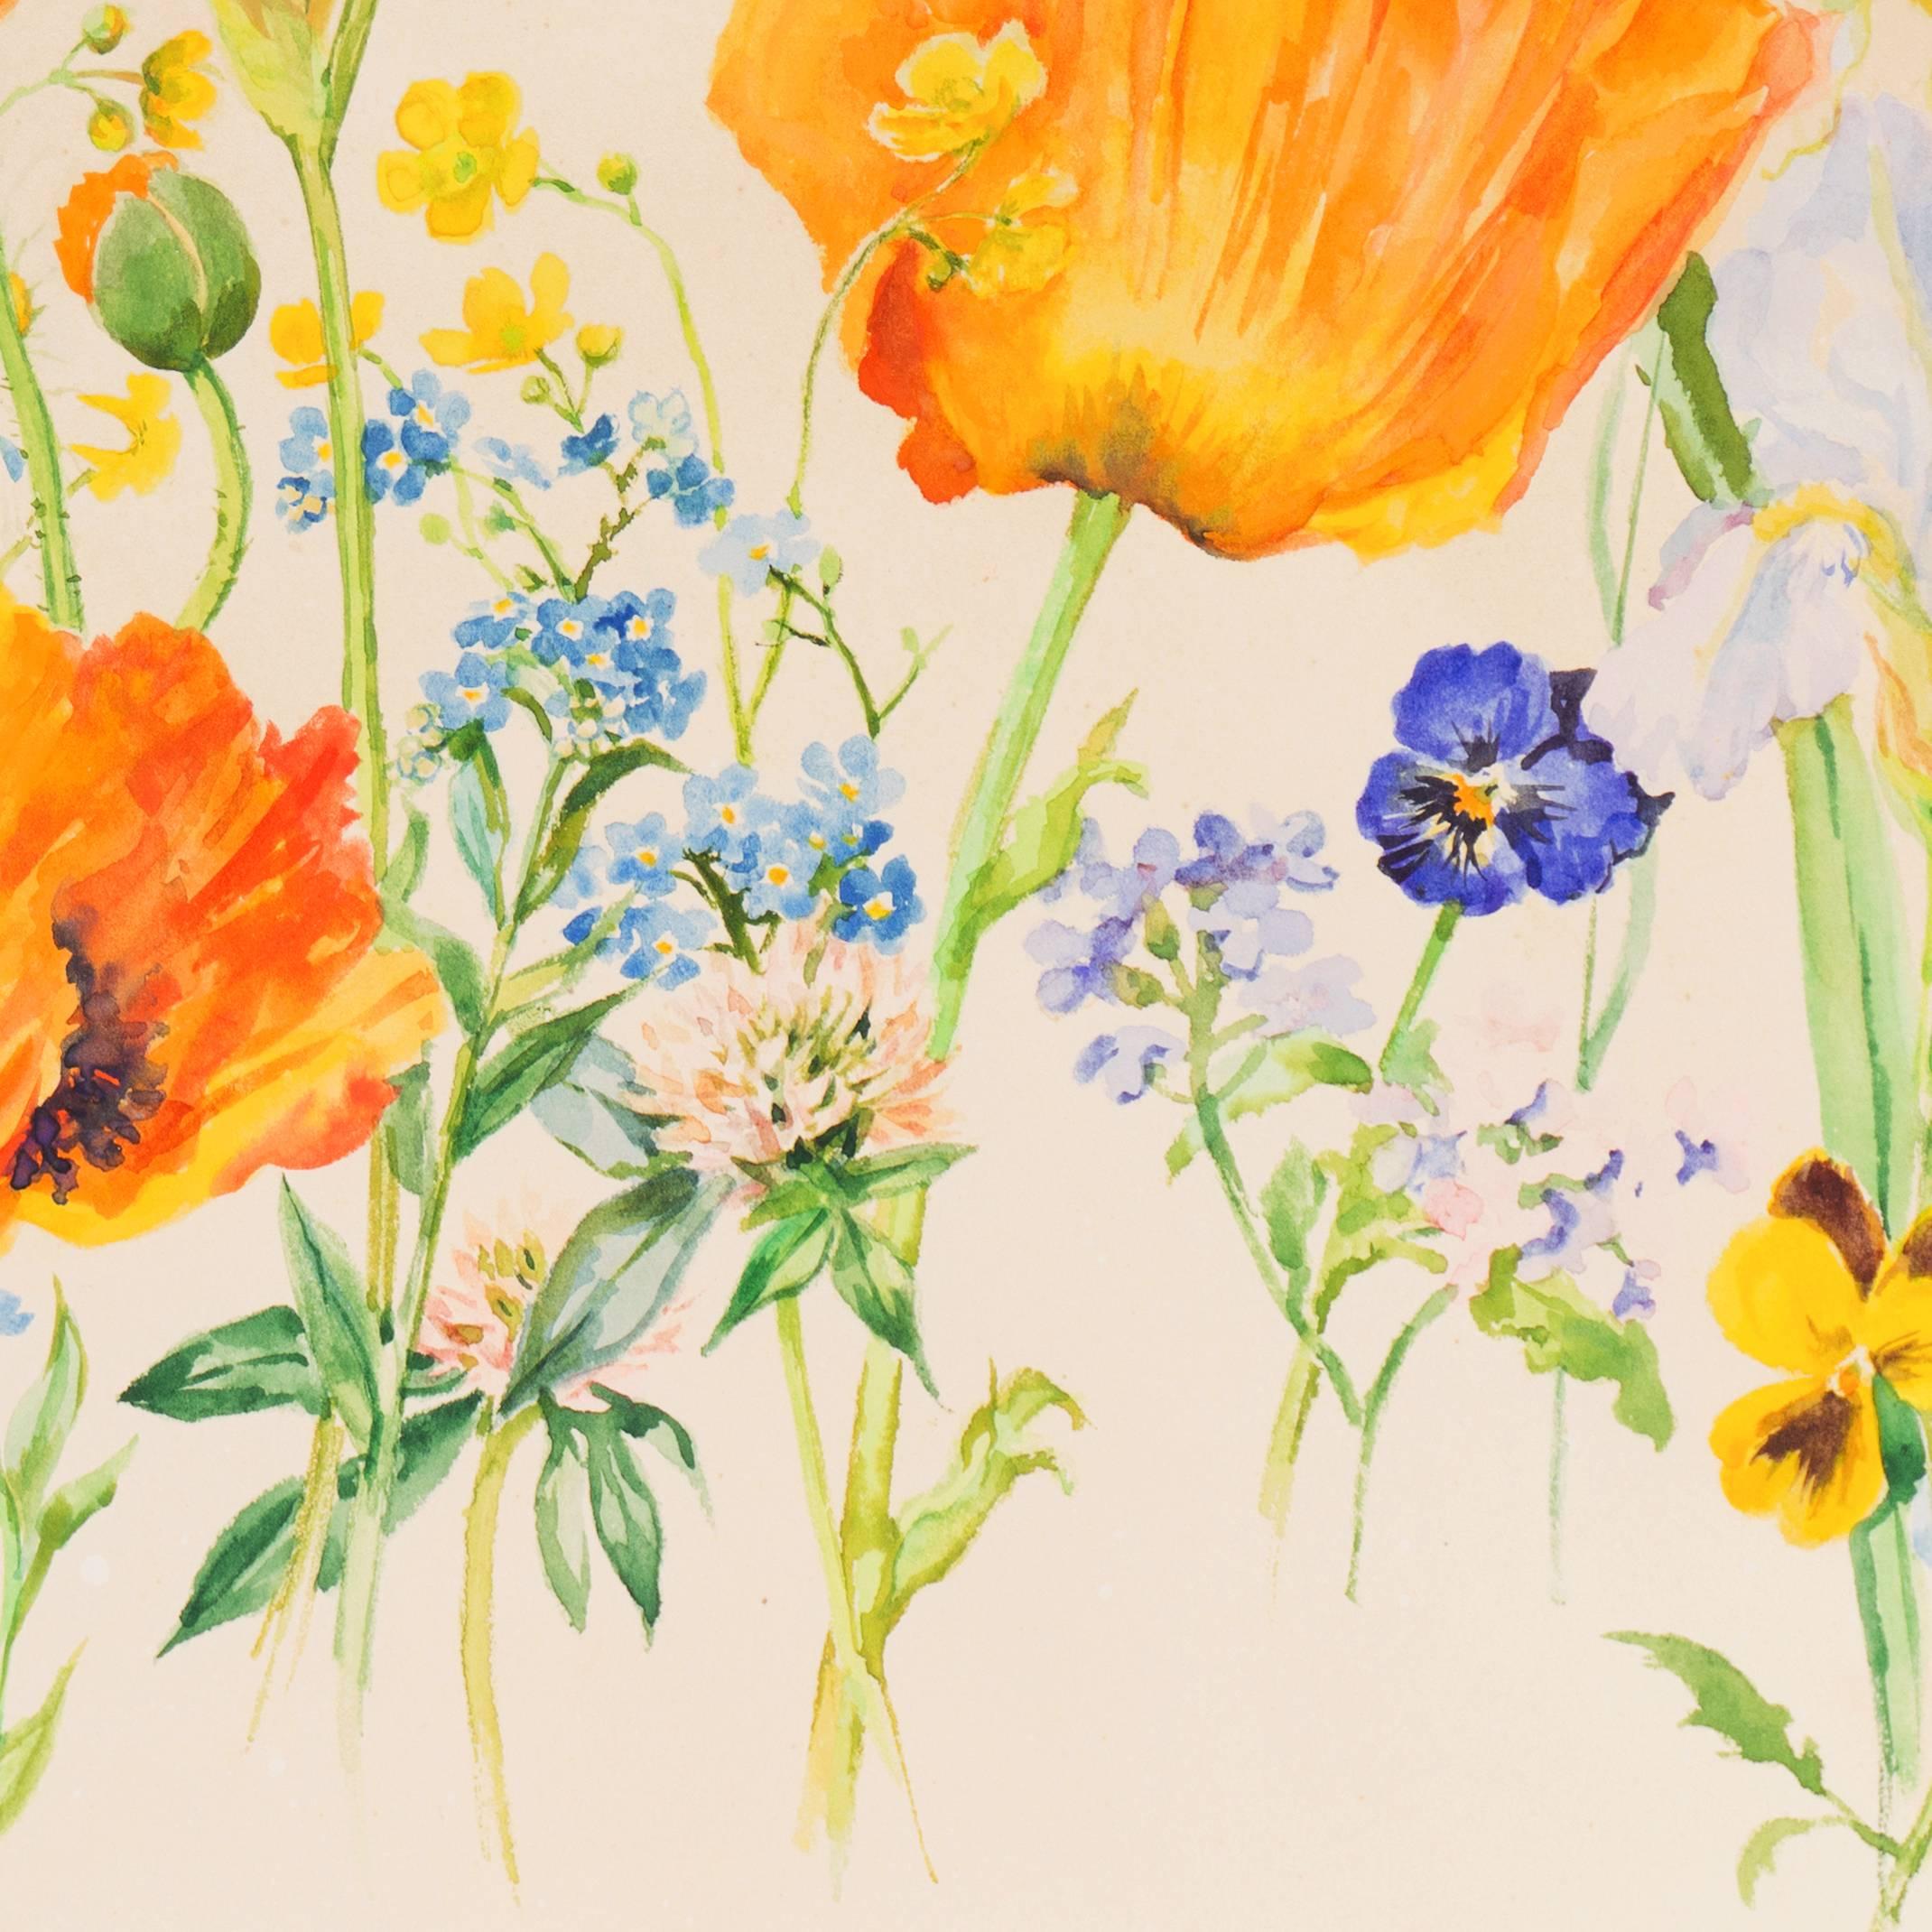 Botanical Study with Poppies  (Russian, Romanoff, Duchess, Royal Family, Queen) 2